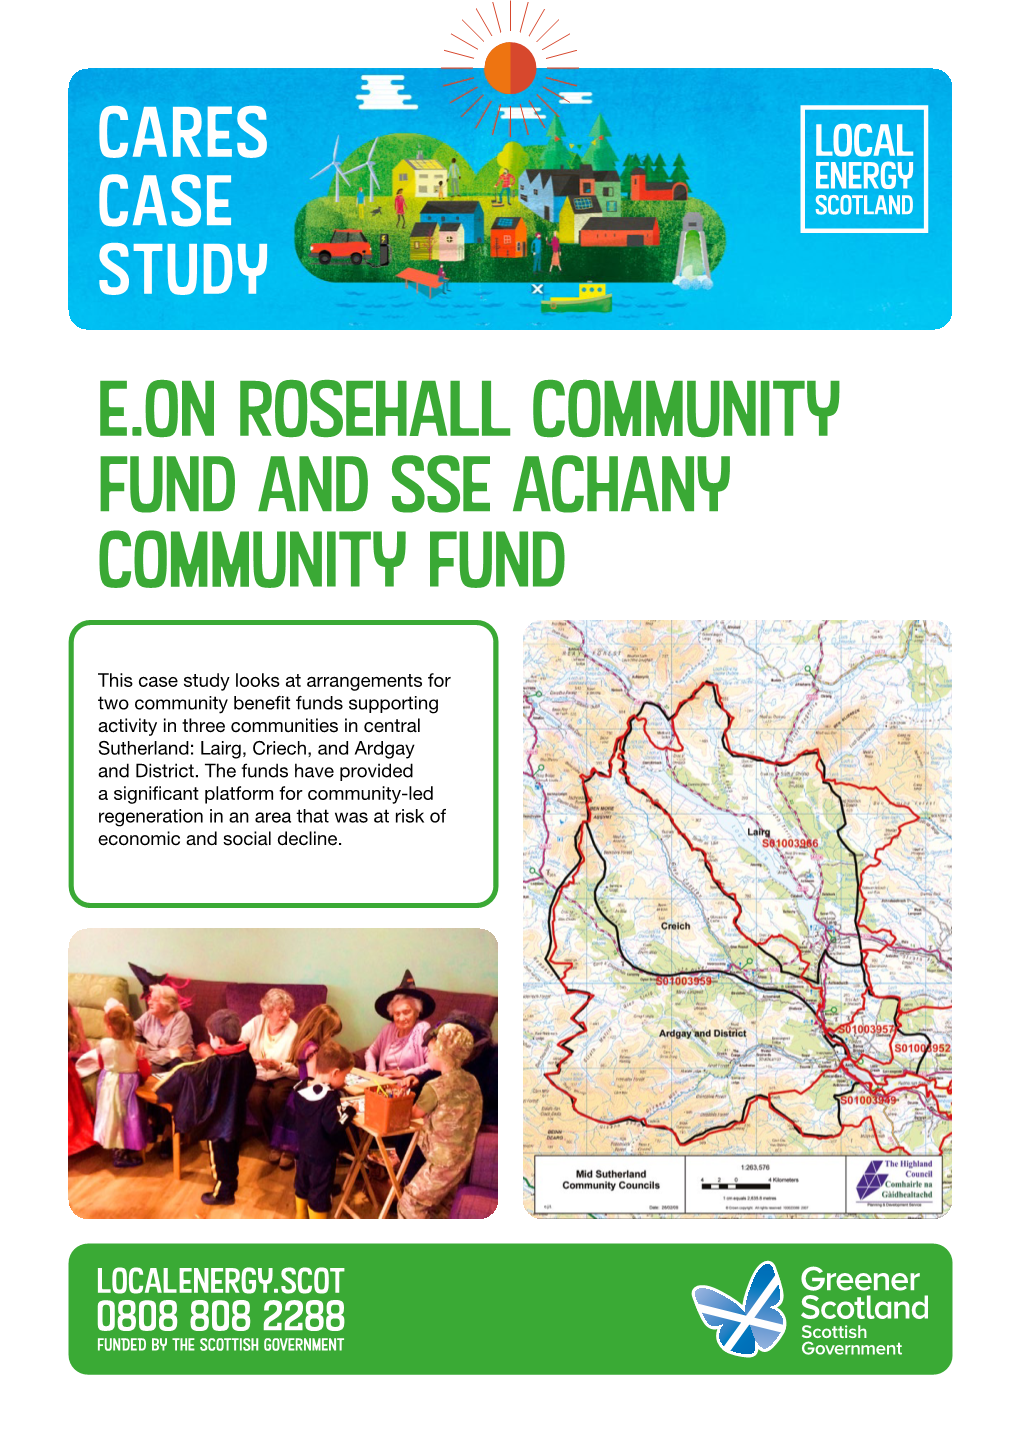 E.ON Rosehall Community Fund and SSE Achany Community Fund